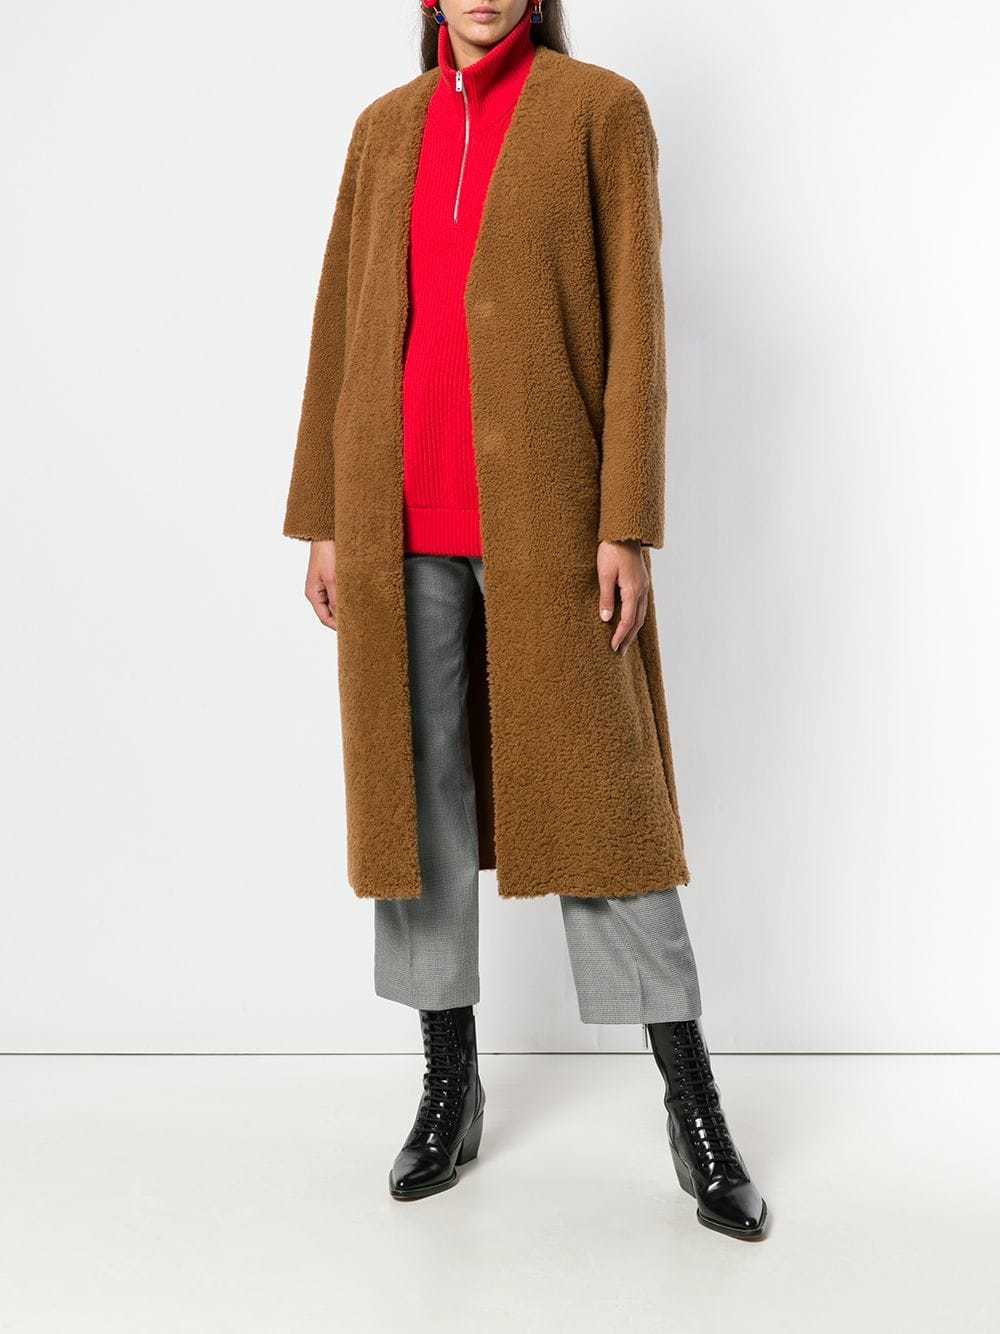 Inès & Marèchal Ins Marchal Single Breasted Shearling Coat, $1,960 ...